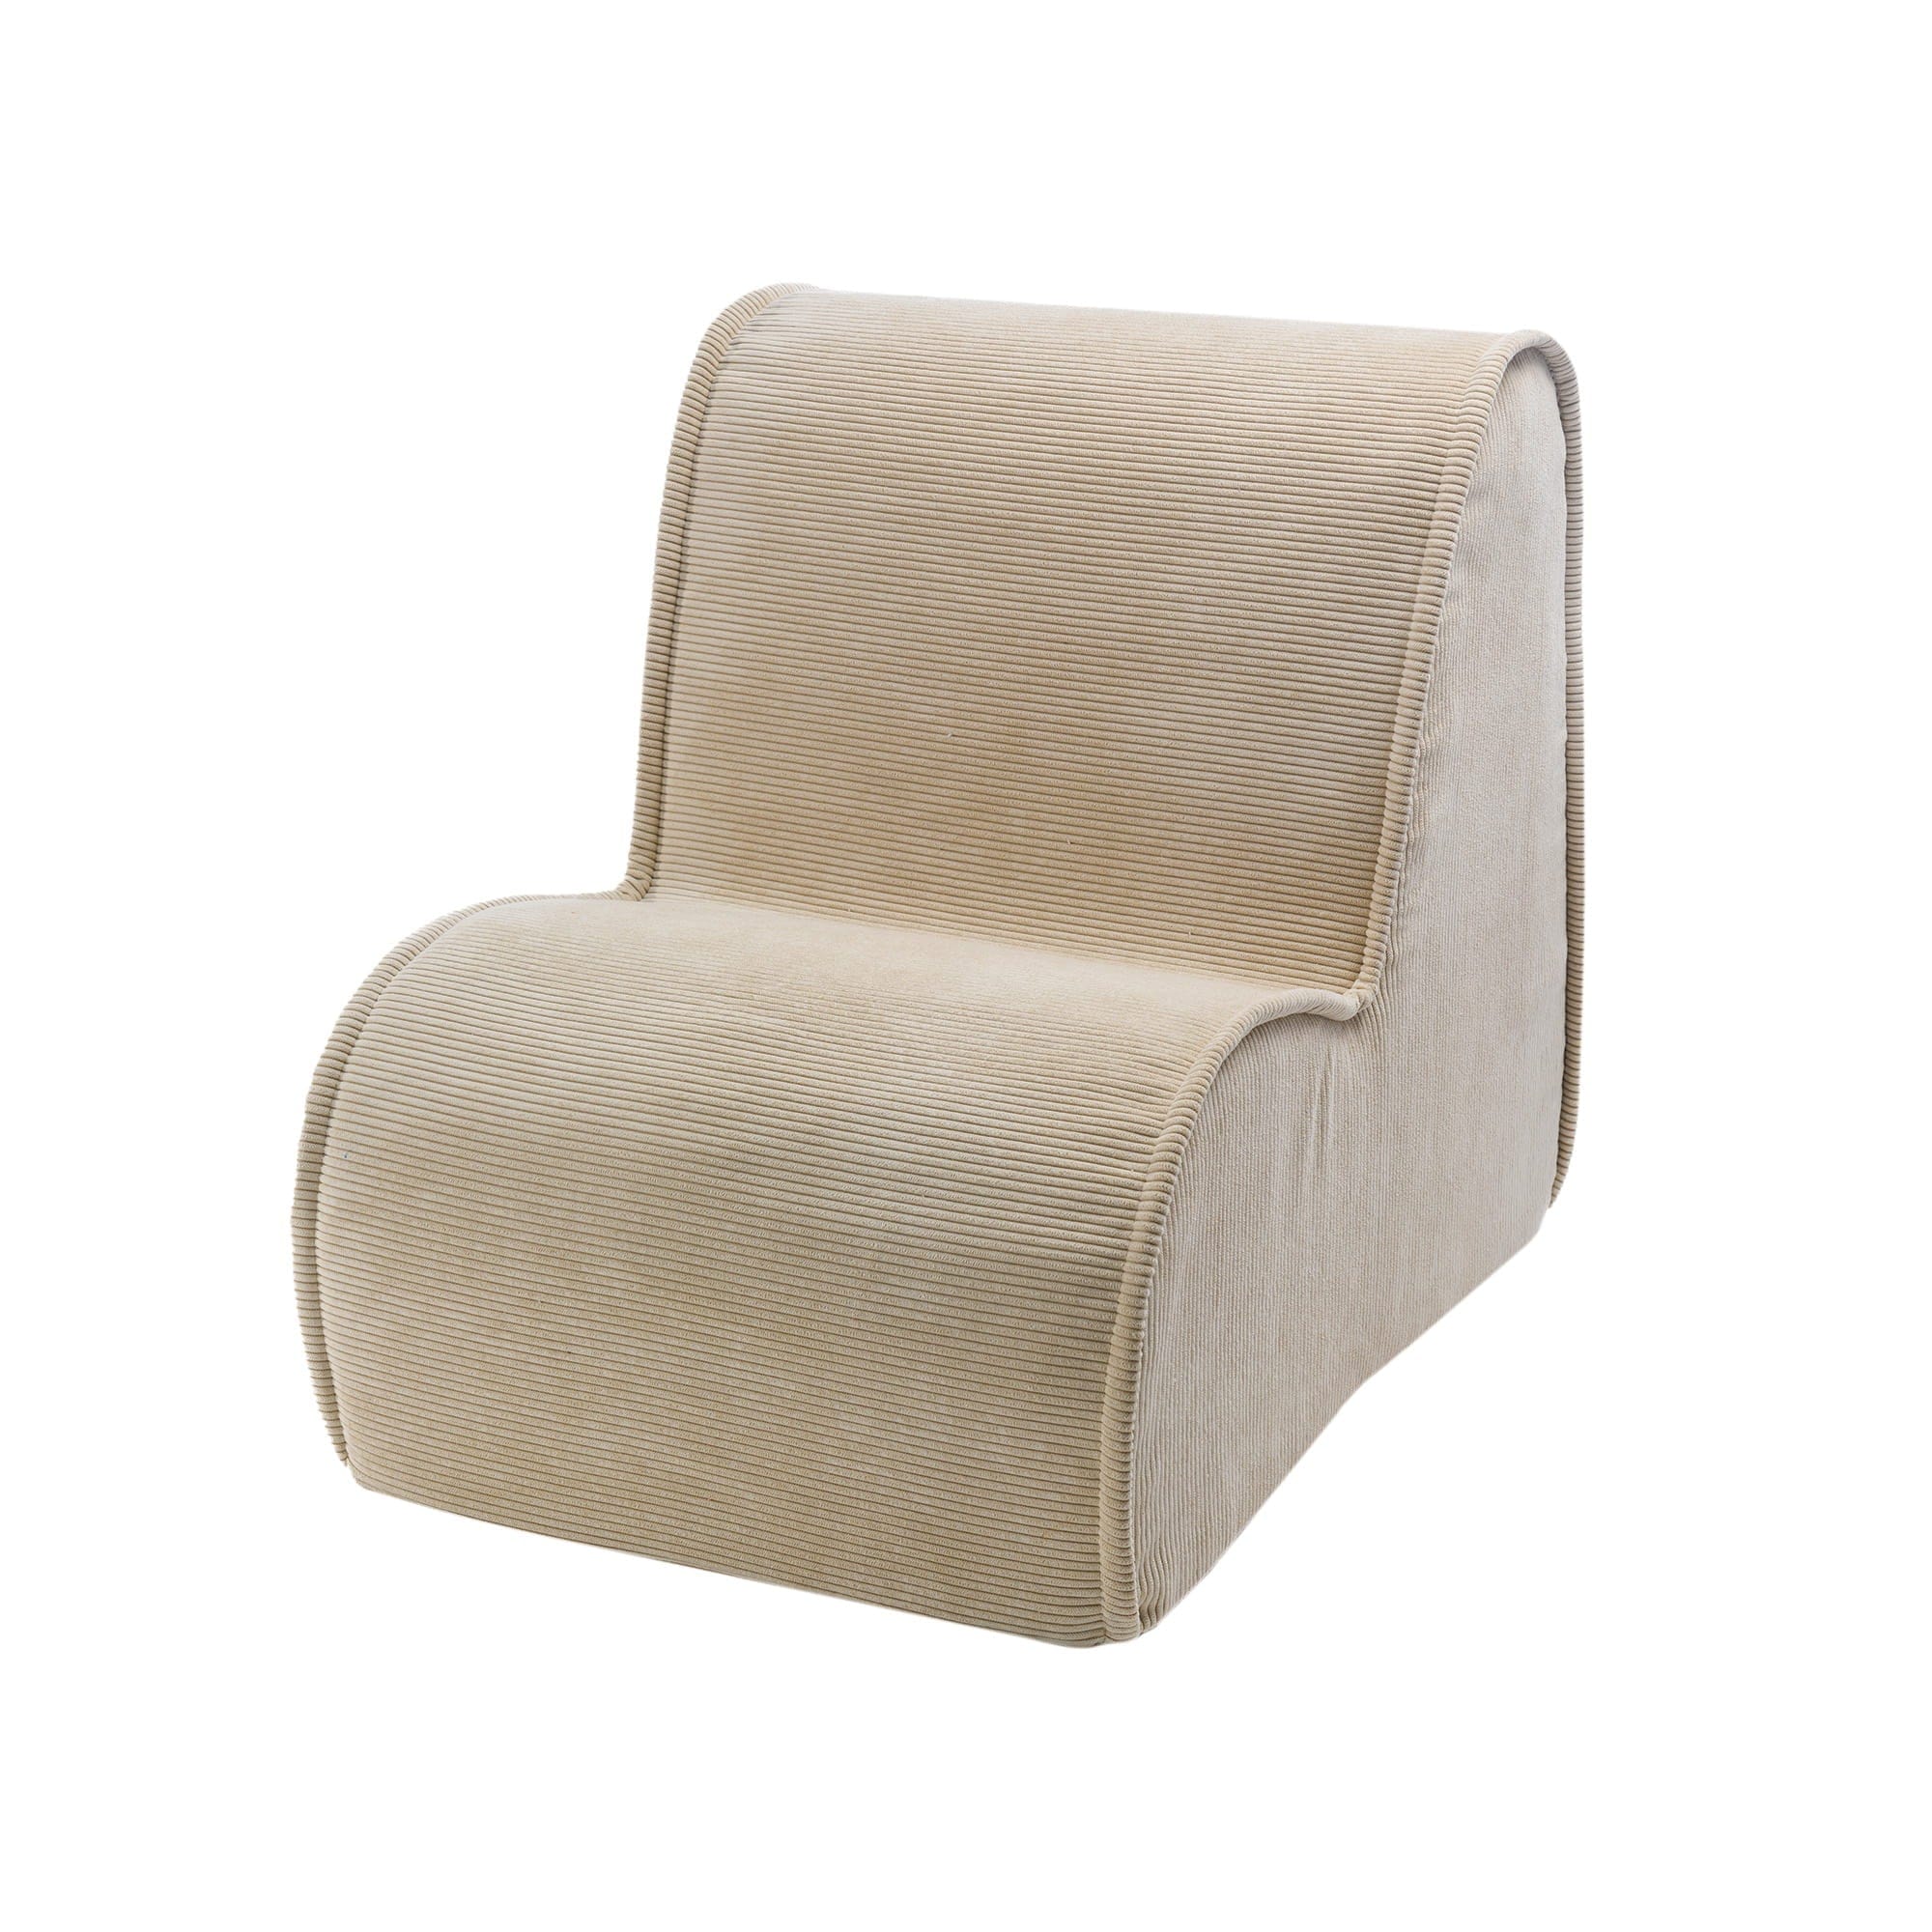 Luxury Corduroy Chair For Kids By MeowBaby